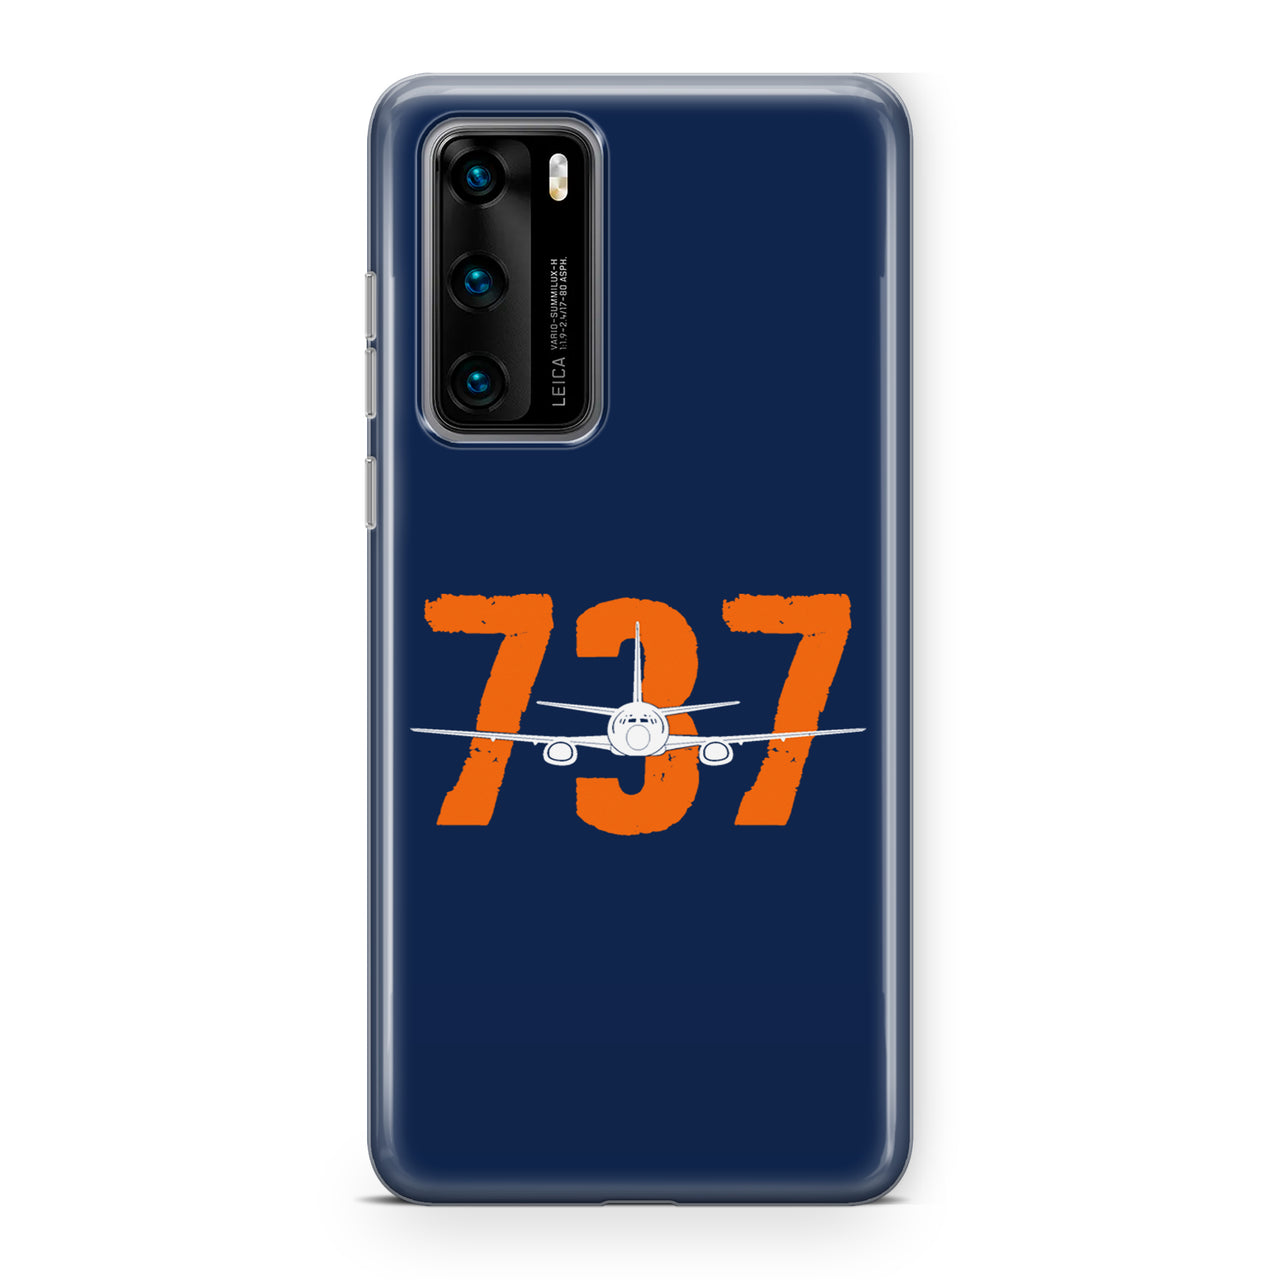 Boeing 737 Designed Huawei Cases